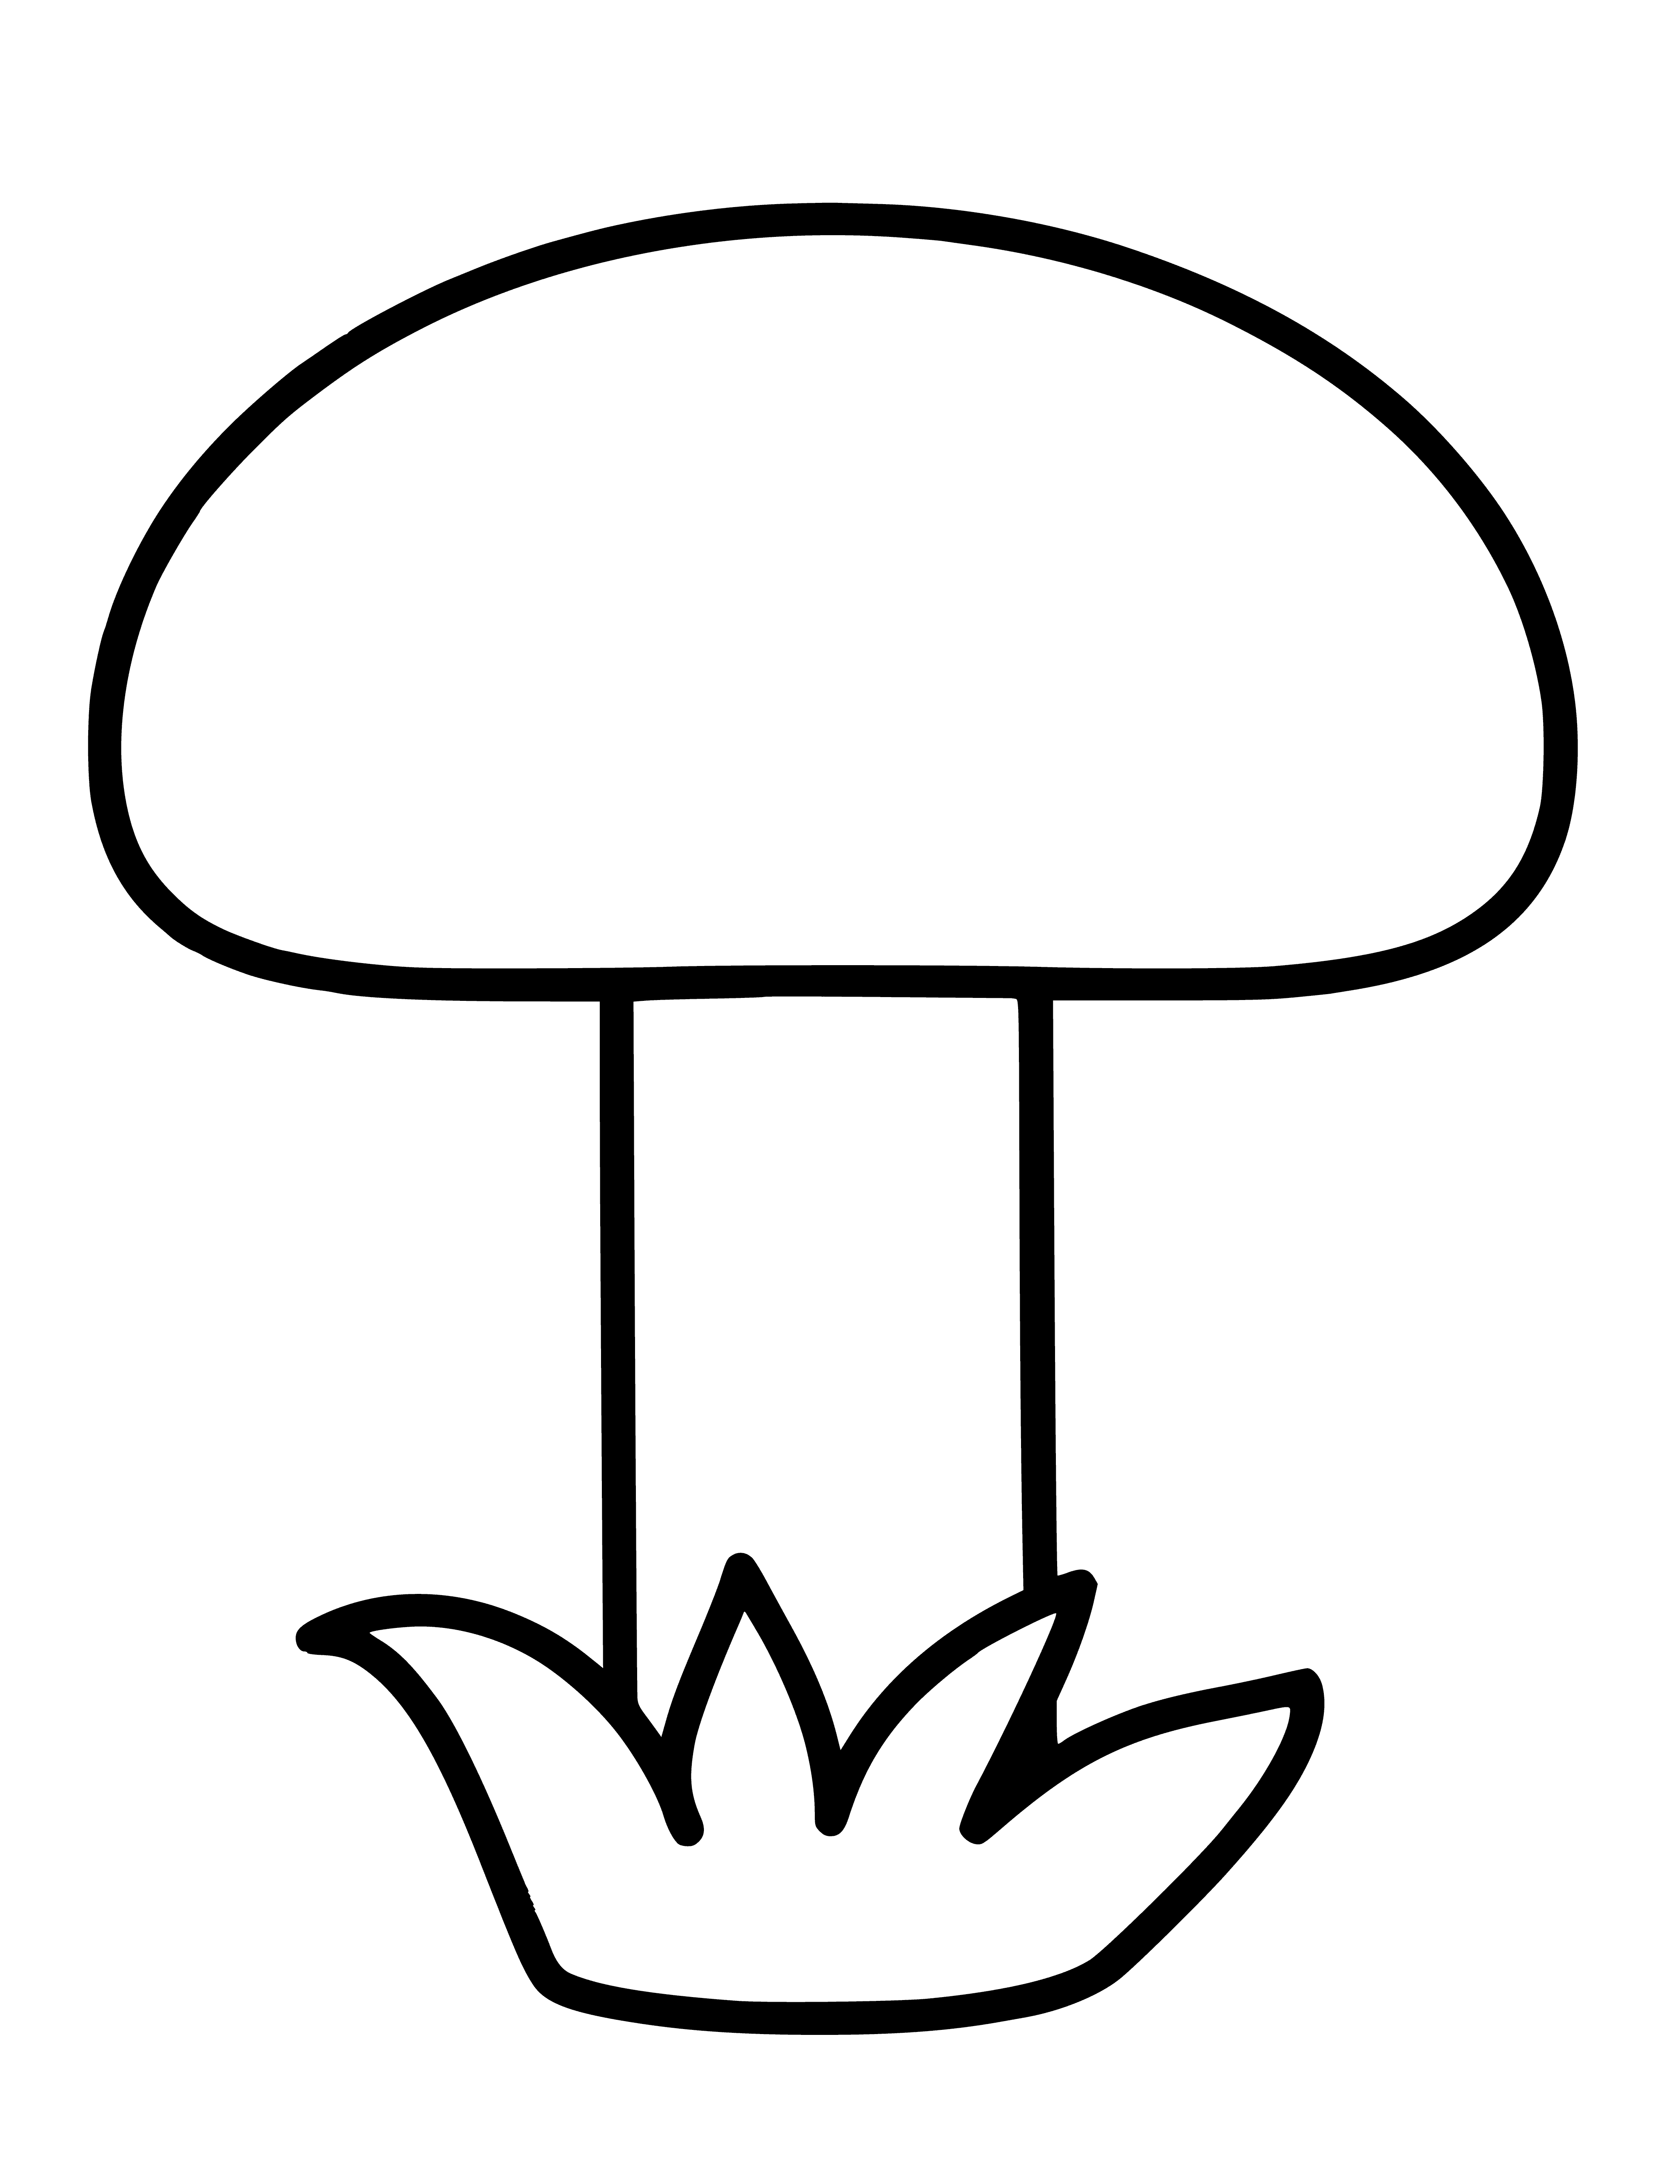 coloring page: Coloring page of mushroom w/ small stalk, brown w/ white spots & a green leaf, perfect for kids age 2-3. #KidsColoring #ColoringPages